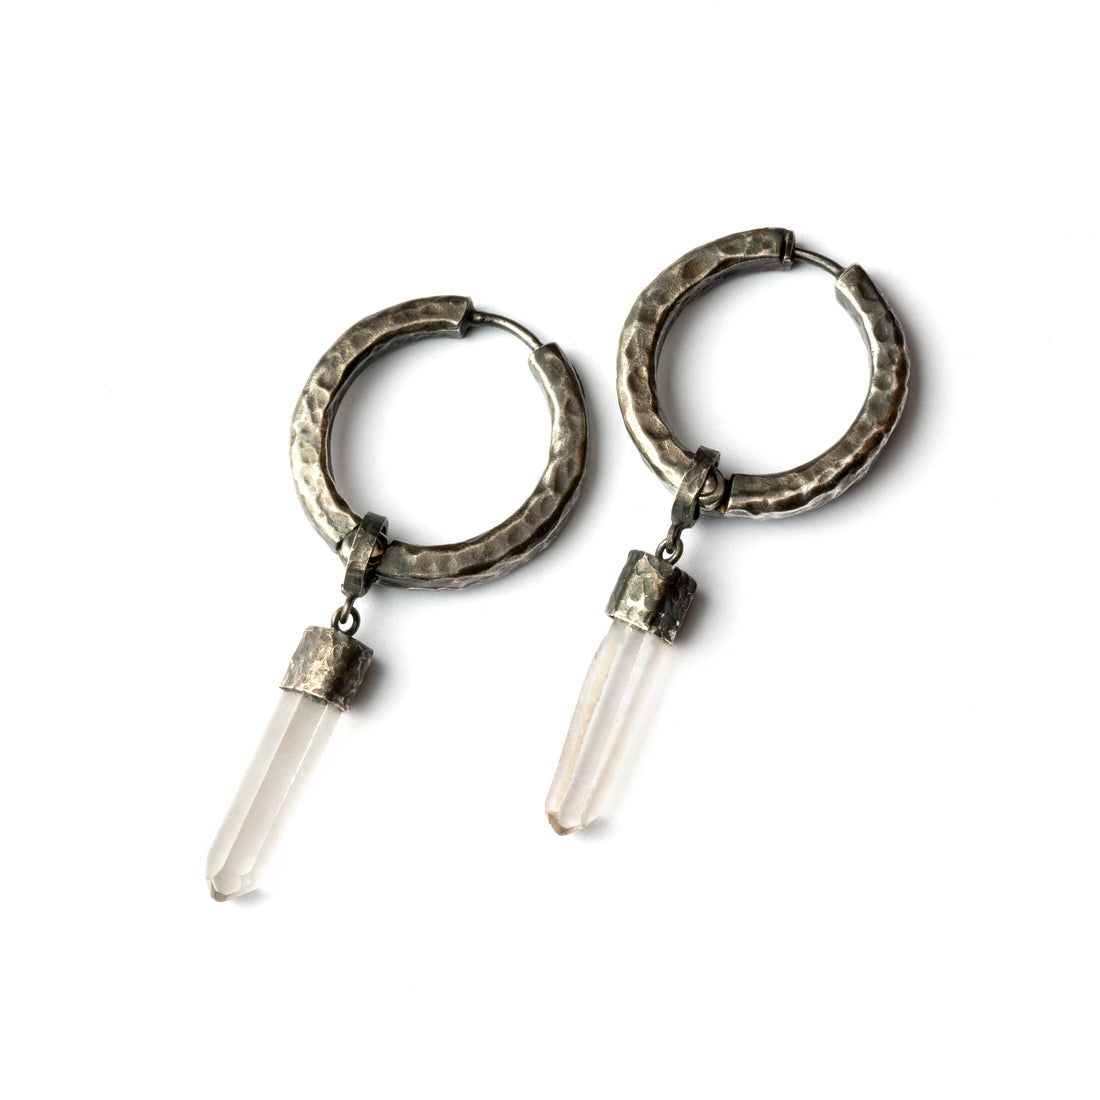 pair of 22mm Black Silver and Crystal Clicker Earrings